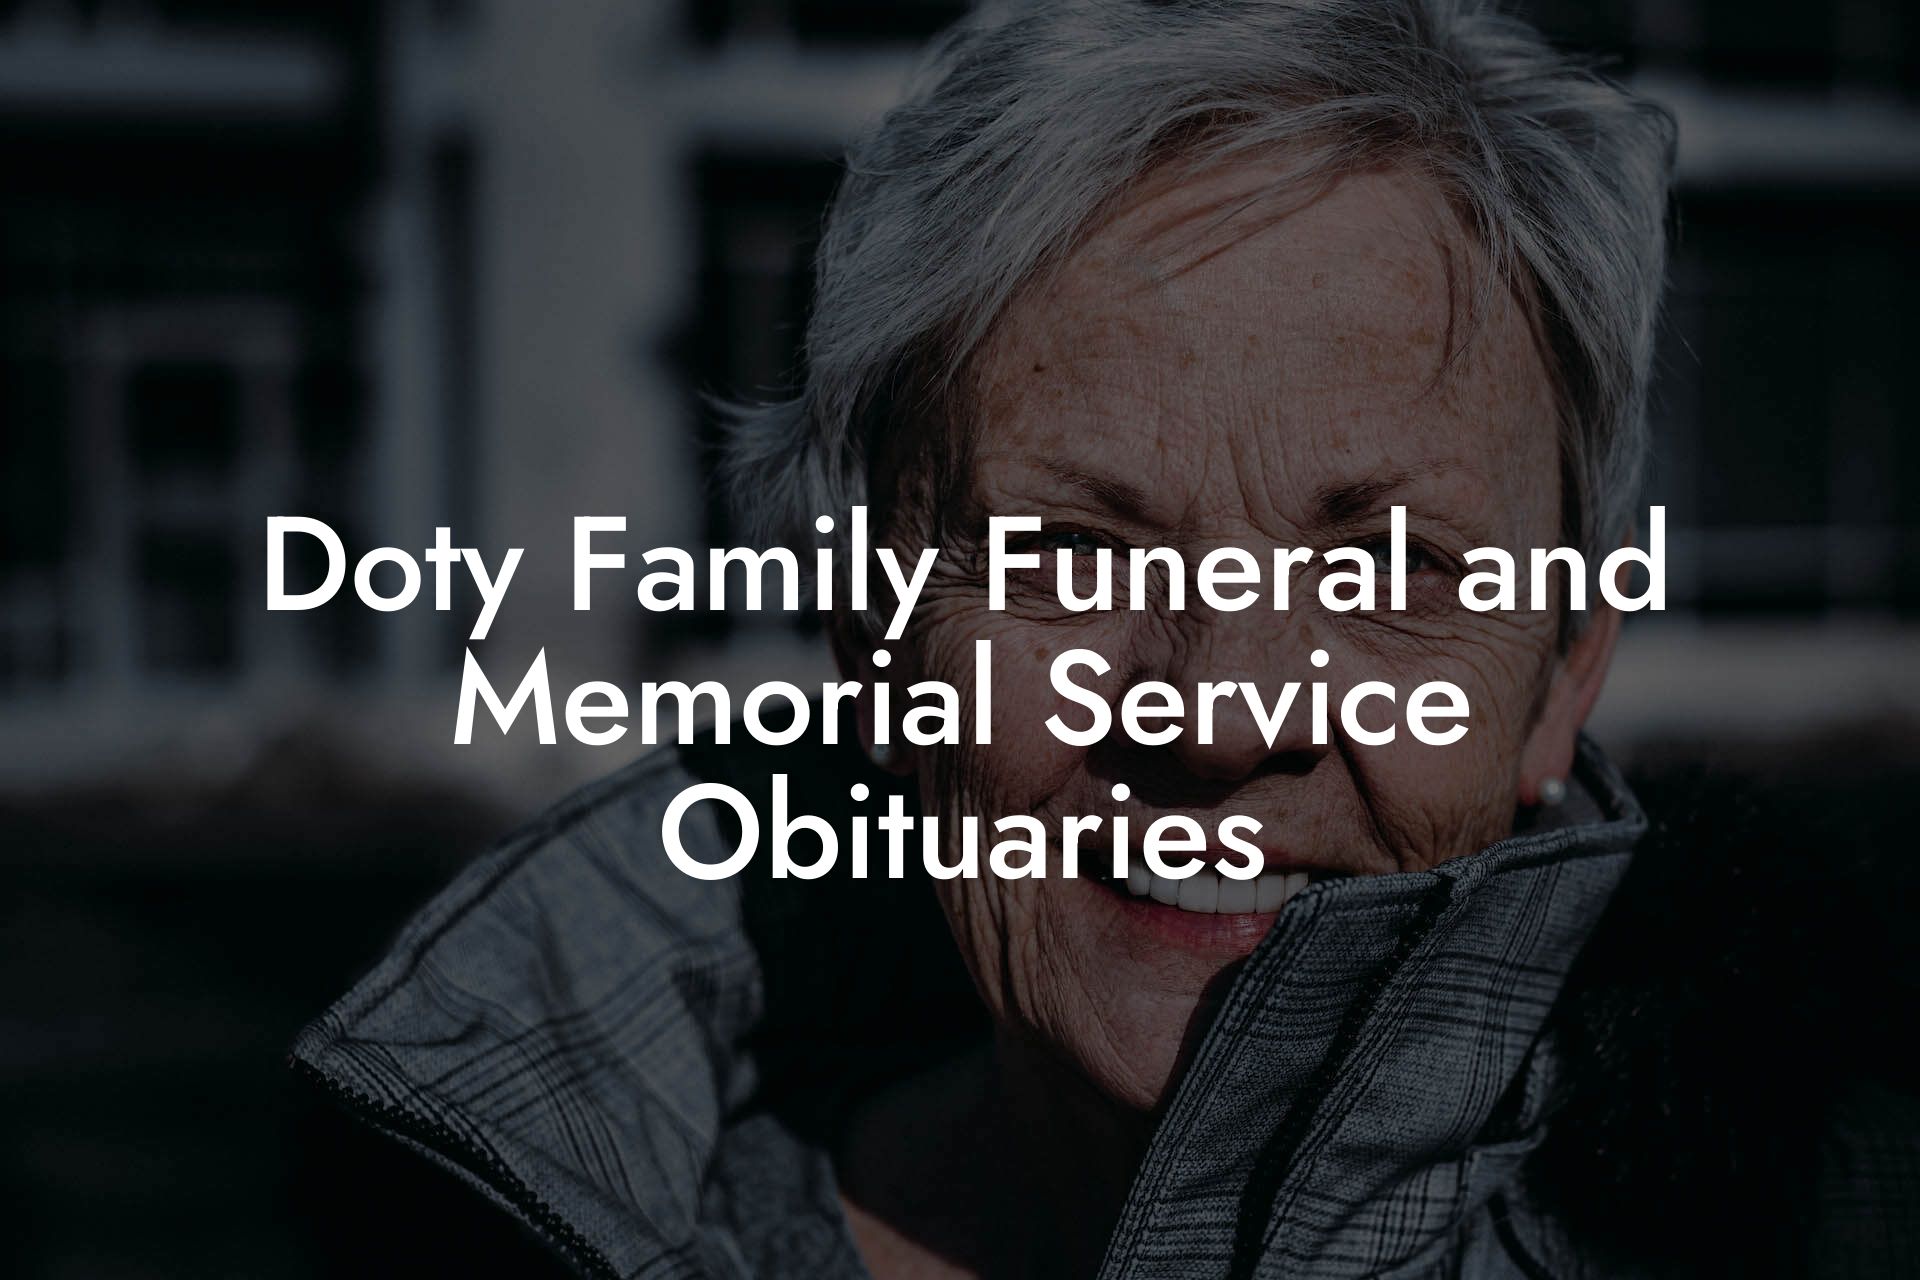 Doty Family Funeral and Memorial Service Obituaries